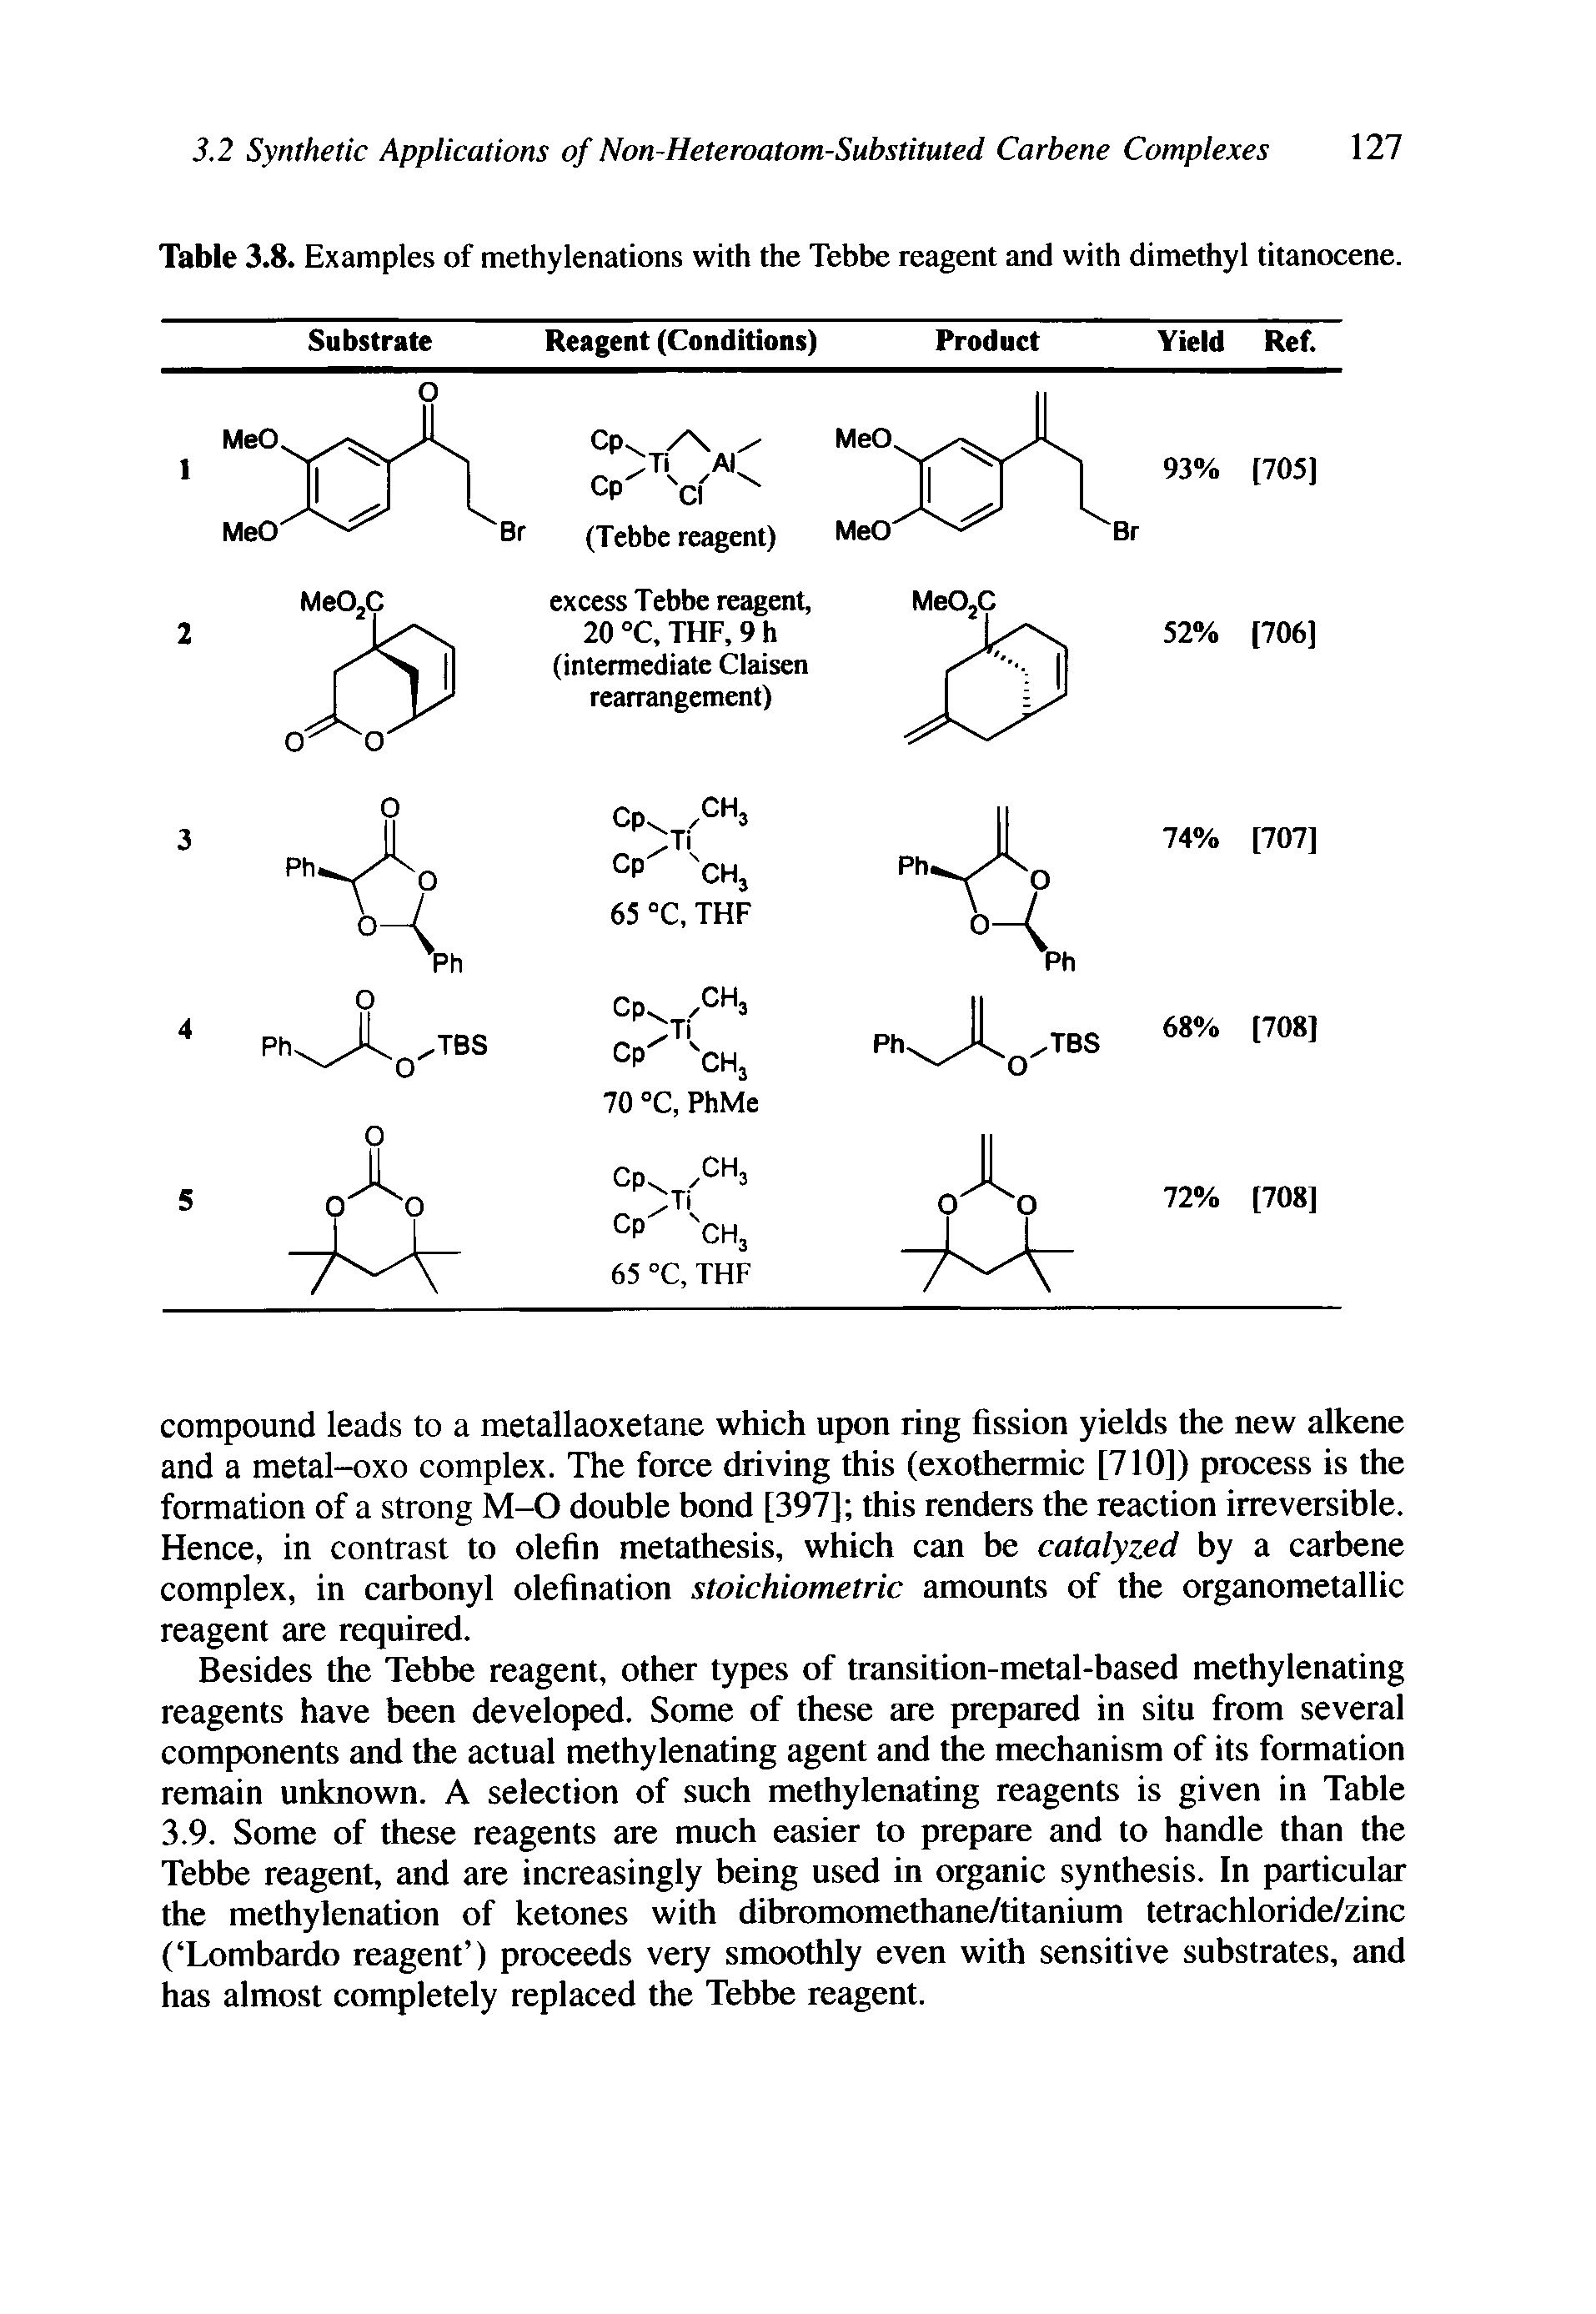 Table 3.8. Examples of methylenations with the Tebbe reagent and with dimethyl titanocene.